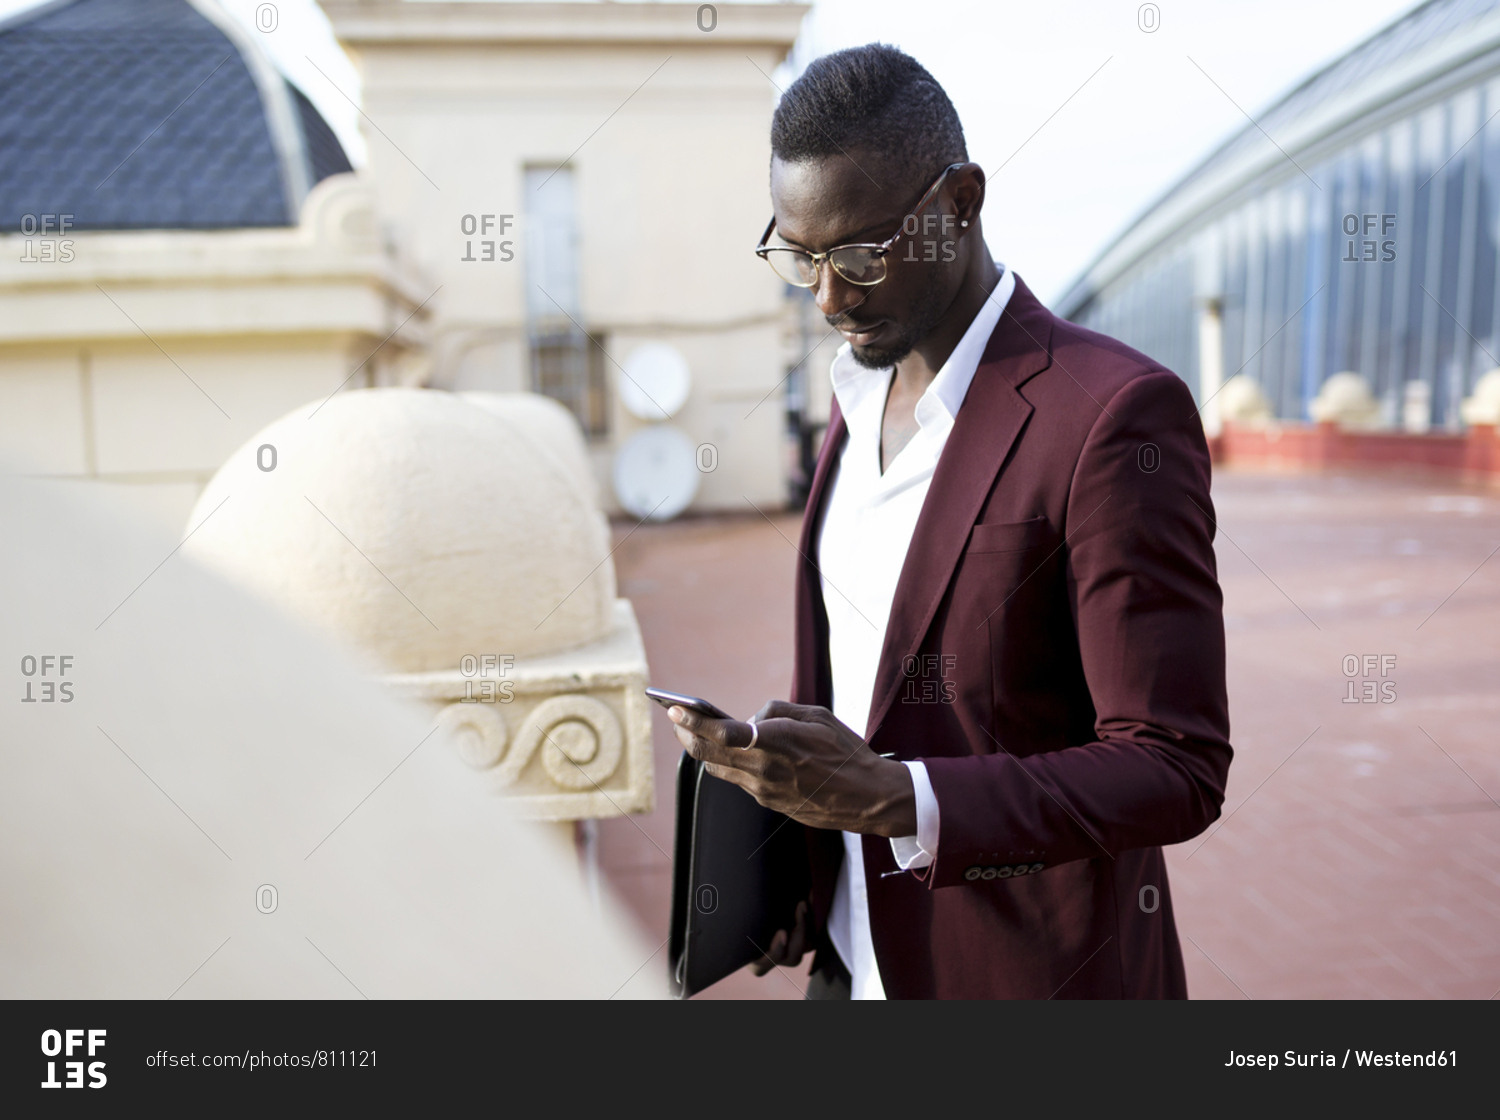 Young entrepreneur waiting on hotel terrace for his appointment- using smartphone